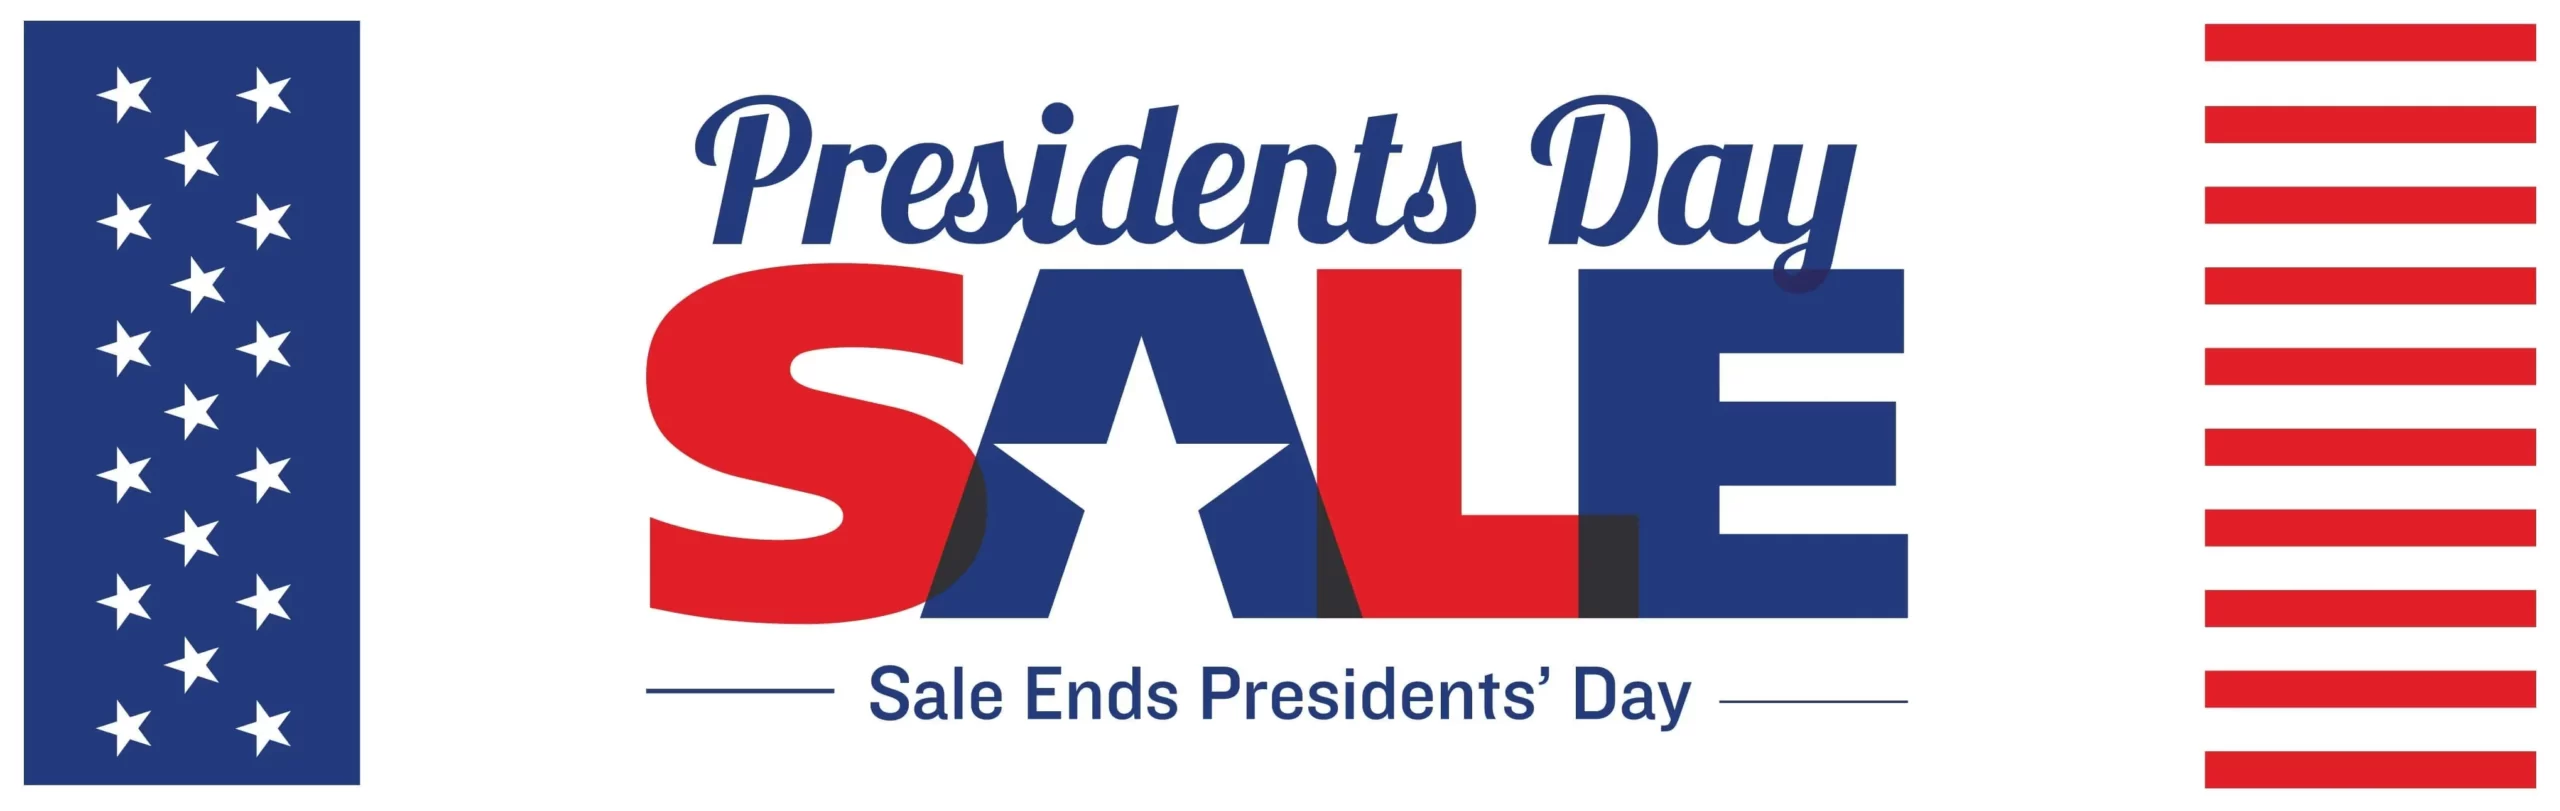 Presidents day sale